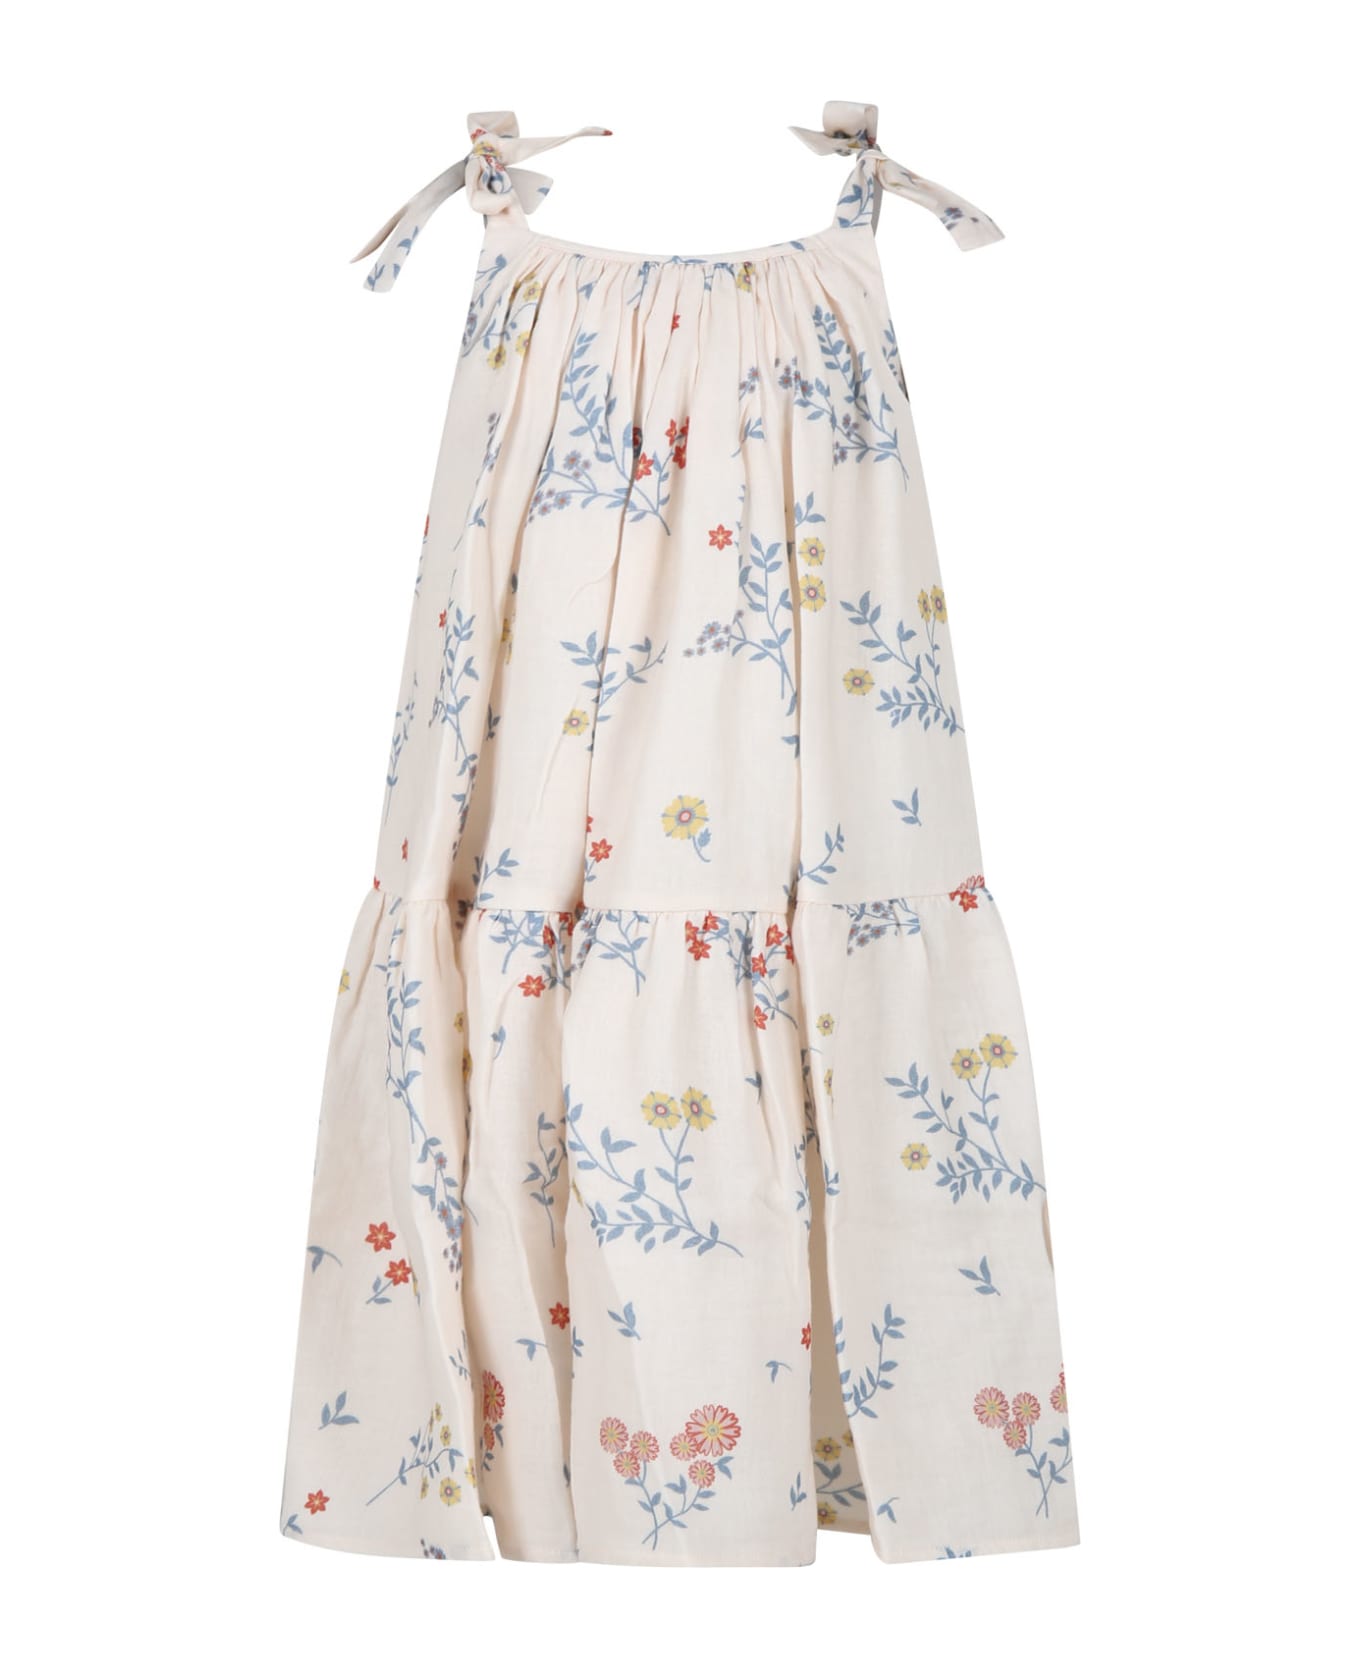 Coco Au Lait Ivory Dress For Girl With Flowers Print - Ivory